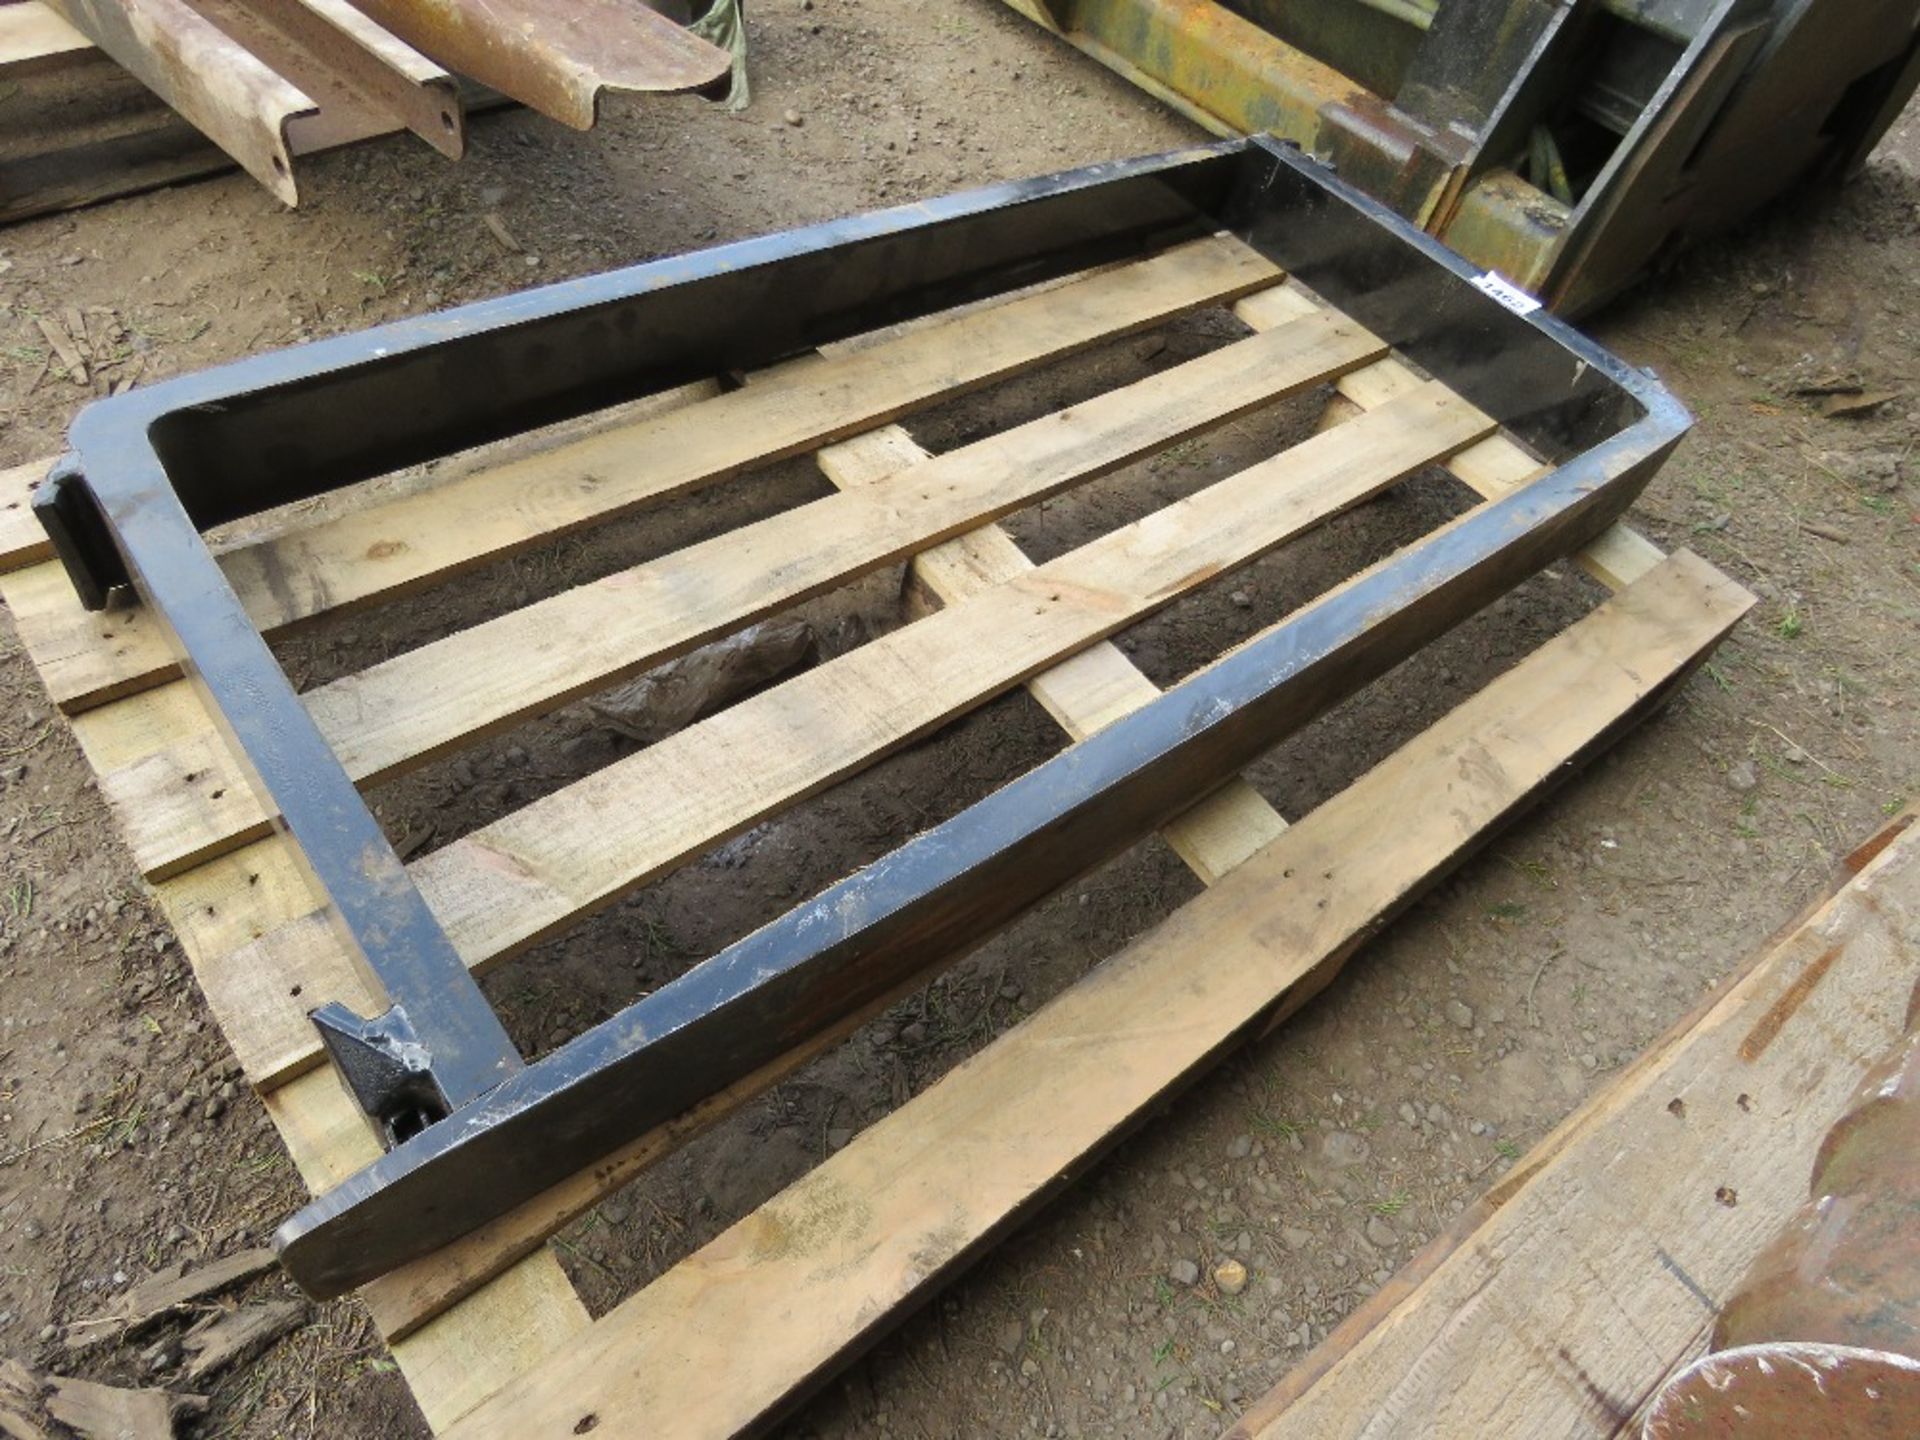 PAIR OF 1.2M LENGTH FORKLIFT TINES TO SUIT 16" CARRIAGE. - Image 2 of 4